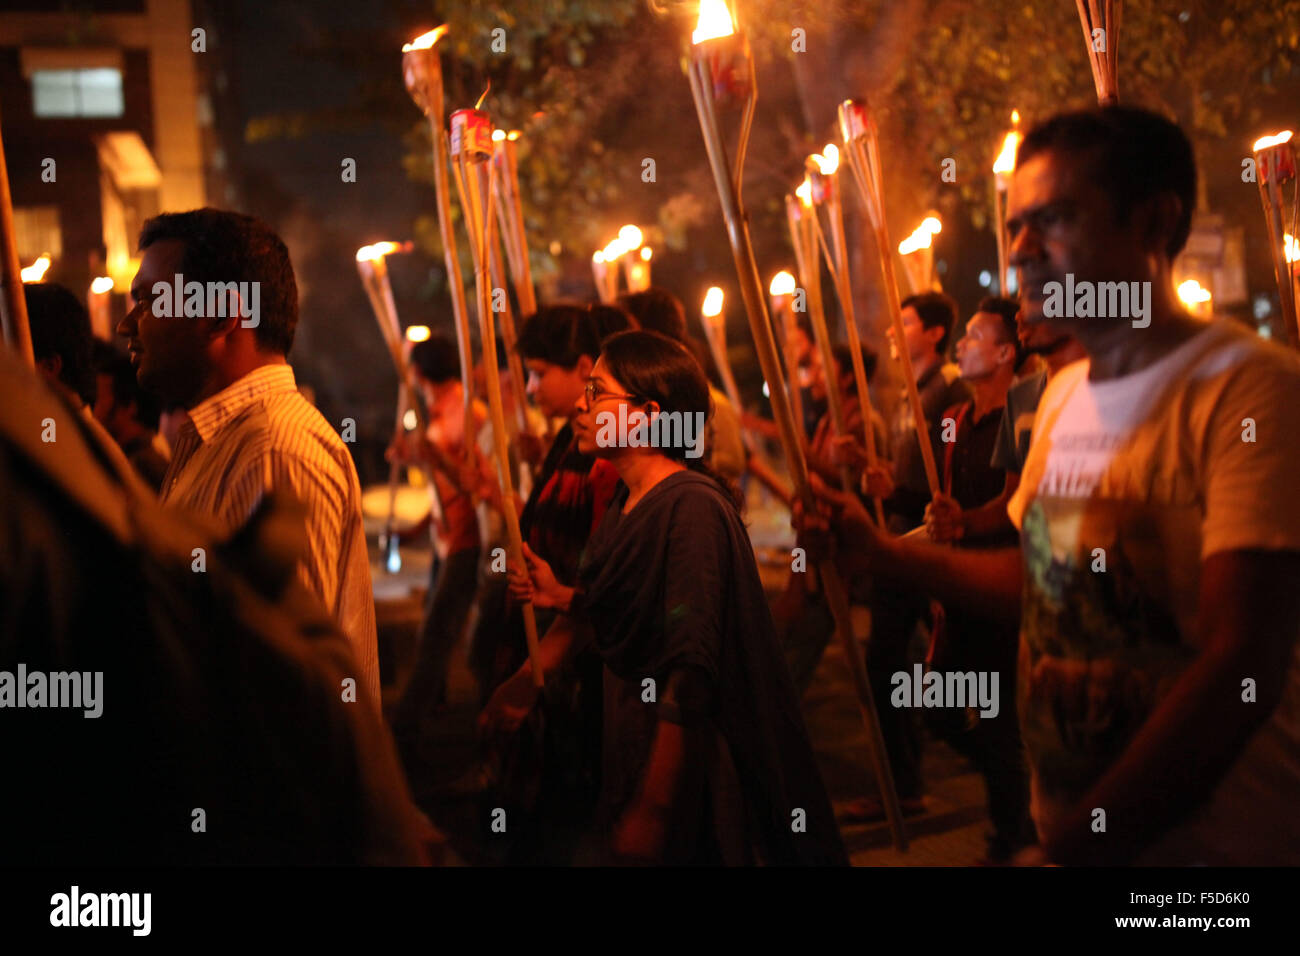 Dhaka, Bangladesh. 2nd Nov, 2015. DHAKA, BANGLADESH 02nd November : Cultural activists, writers and members of the Ganajagaran Mancha shout slogans as they attend a torch light procession protesting the killing and attacks on the publisher and bloggers in Dhaka on November 02, 2015.Ganajagaran Mancha has called for a half-day country-wide strike on 03 November demanding the arrest of the assailants of publishers. The publisher Faisal Arefin Dipan was stabbed to death in Dhaka on 31 October, hours after unidentified assailants knifed another publisher and two secular bloggers elsewhere in th Stock Photo